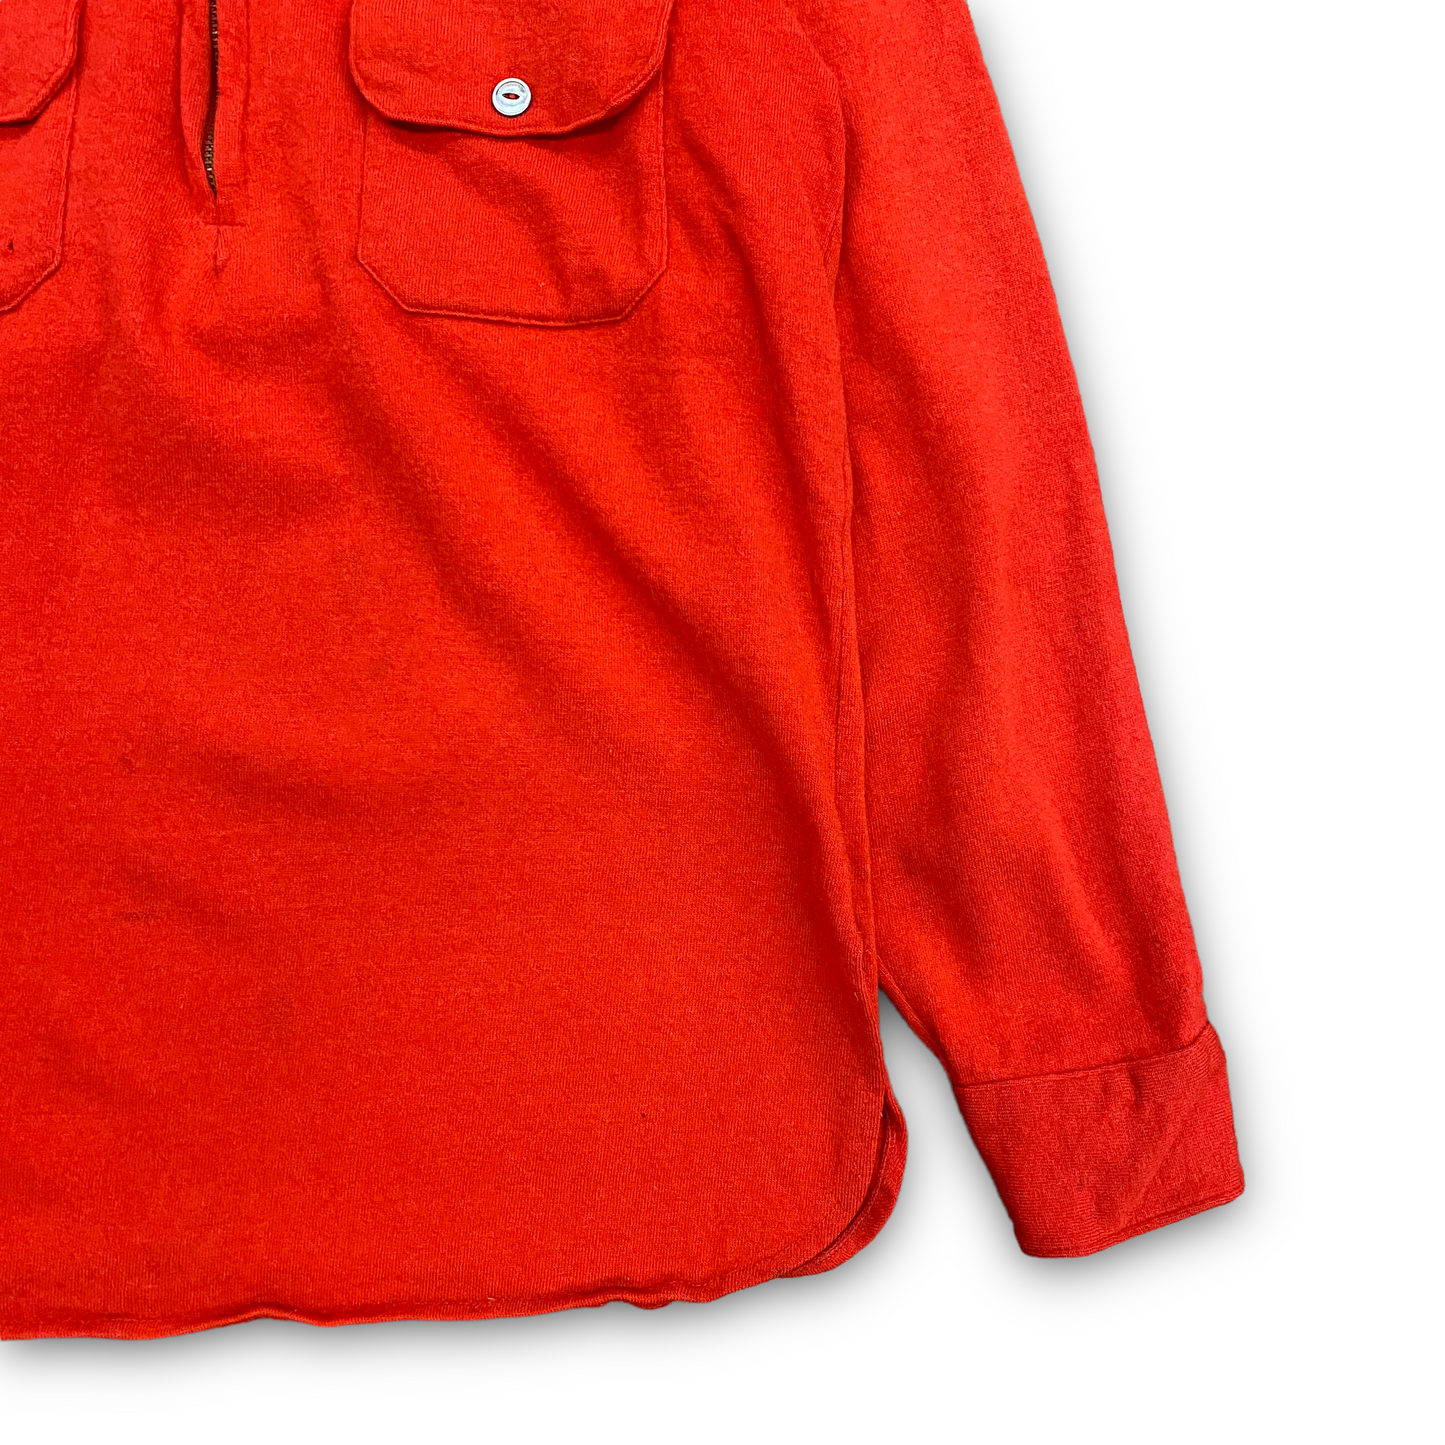 1960s Spinnaker Red Wool Sailing Shirt - Size Large